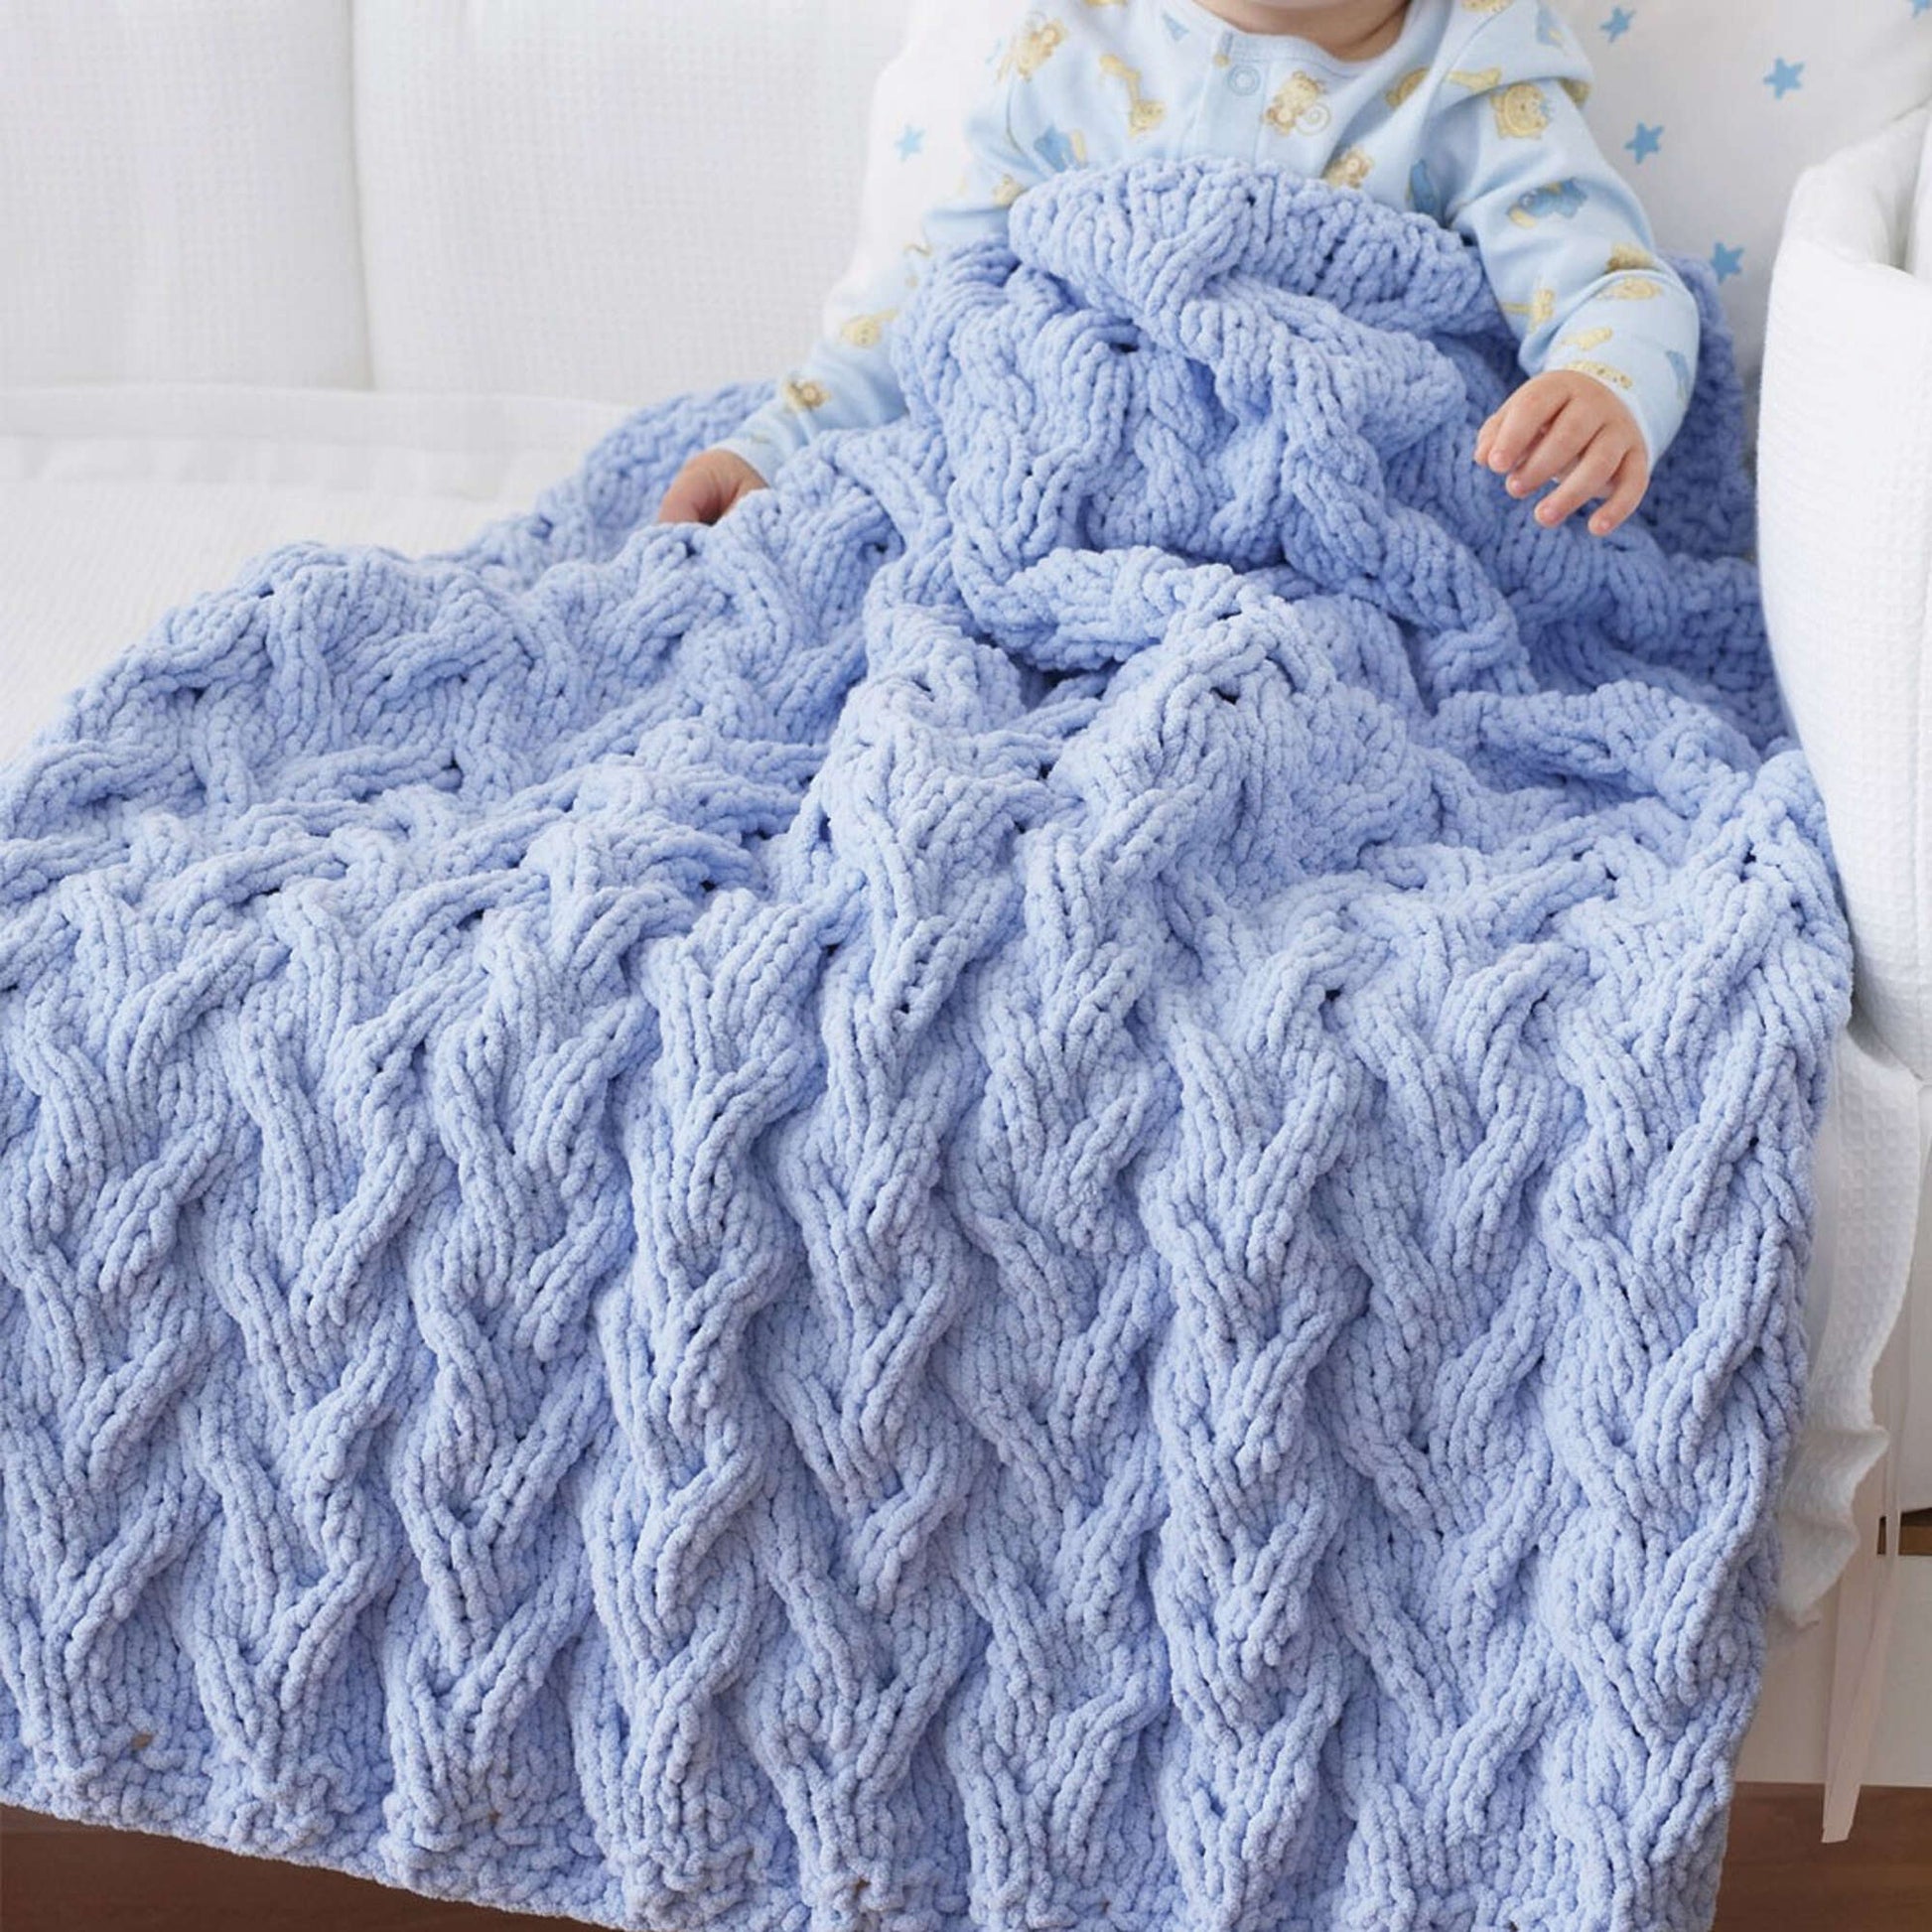 Free Bernat Shadow Cable Knit Baby Blanket Pattern